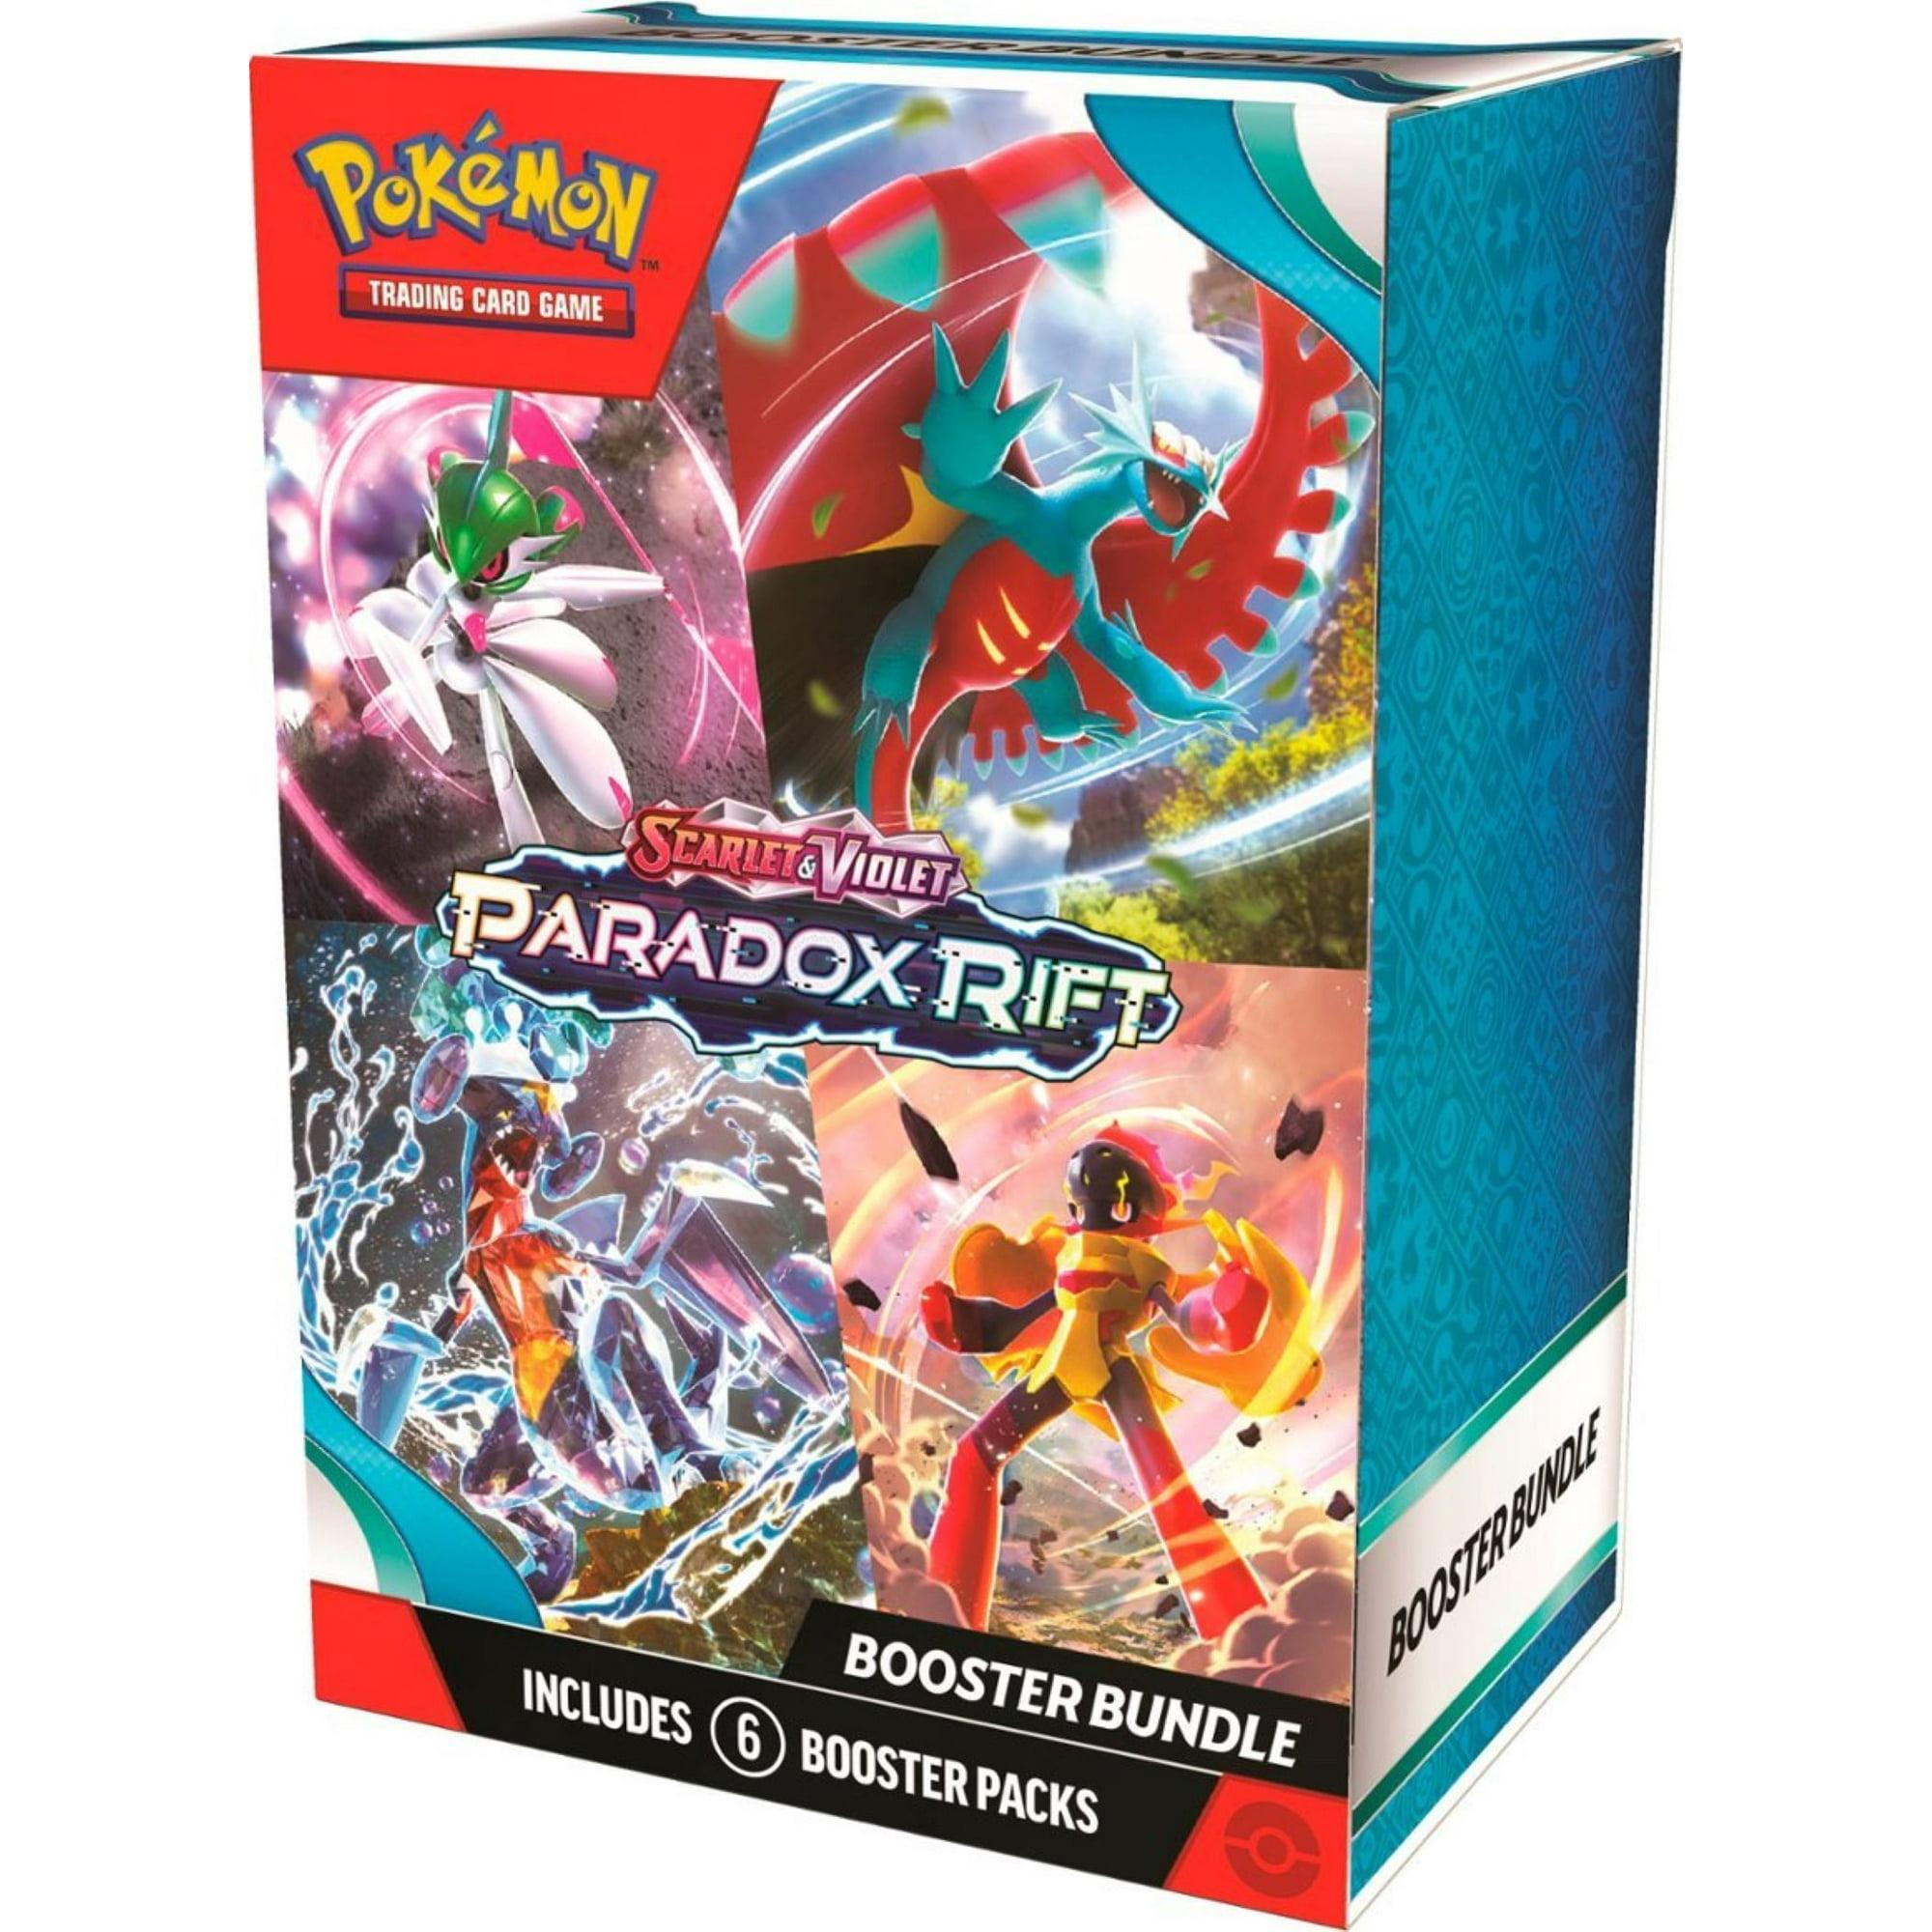 Pokemon Paradox Rift Booster Box with 6 blister packs